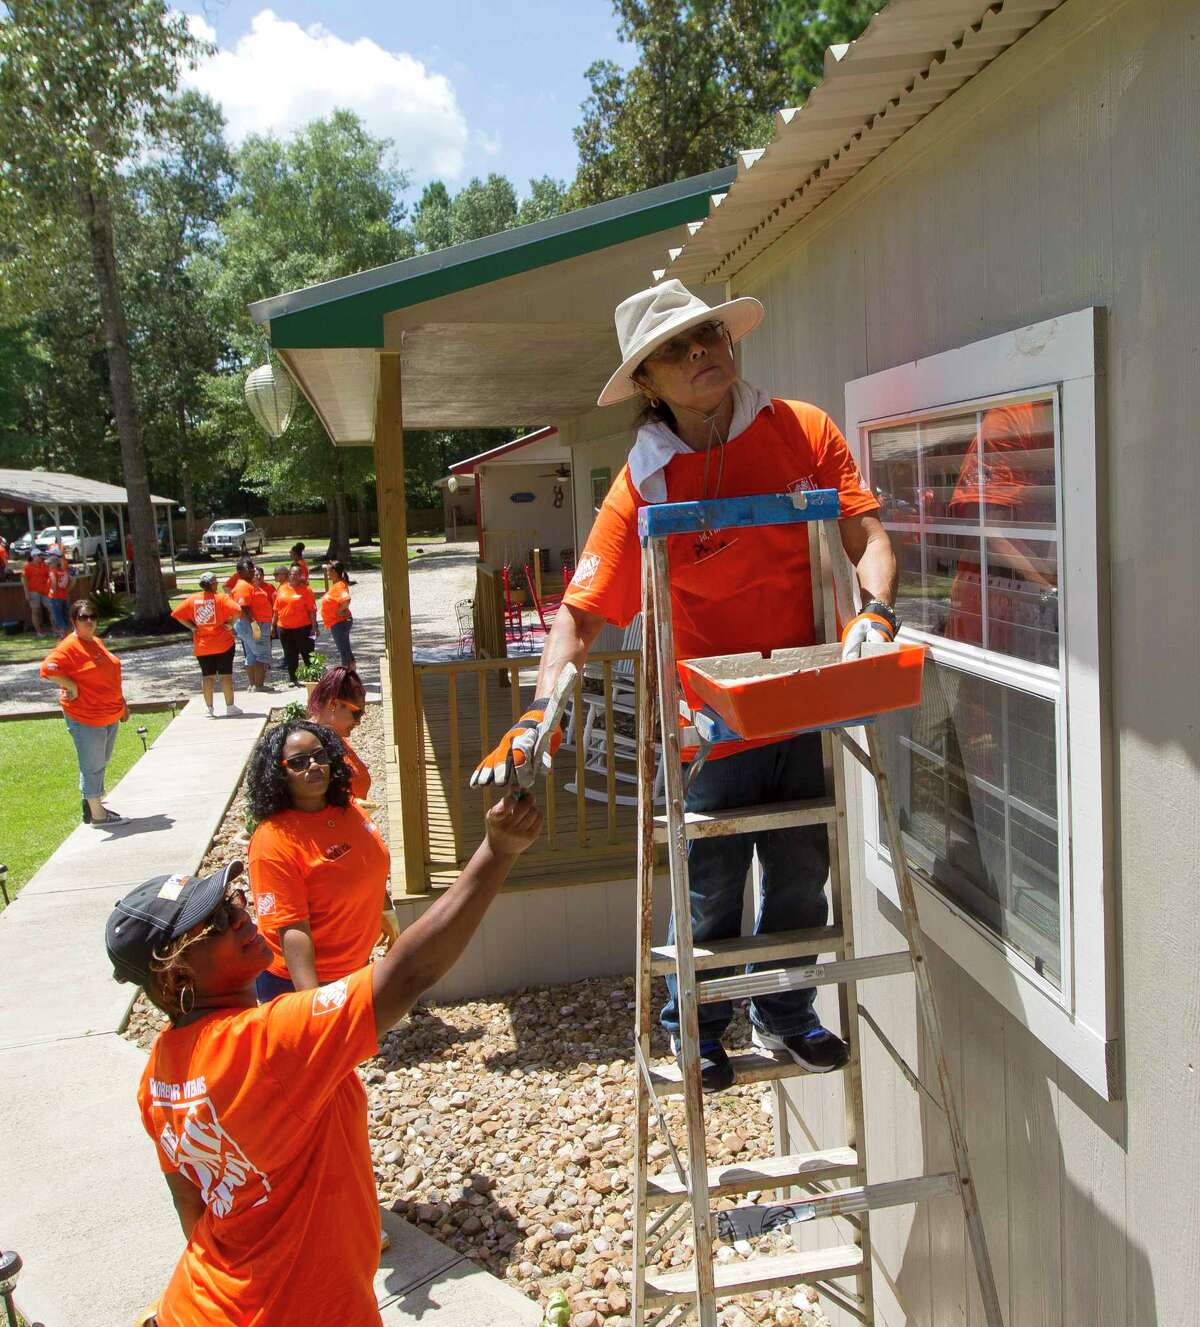 Phil Schiffman works on painting a cottage at Hope Cancer Retreat, Thursday, July 27, 2017, in Splendora. Ten Home Depot stores gathered at the non-profit to work on various projects from landscaping to painting. The organization offers housing to those seeking cancer treatment in Houston for $25 a night for up to three months.